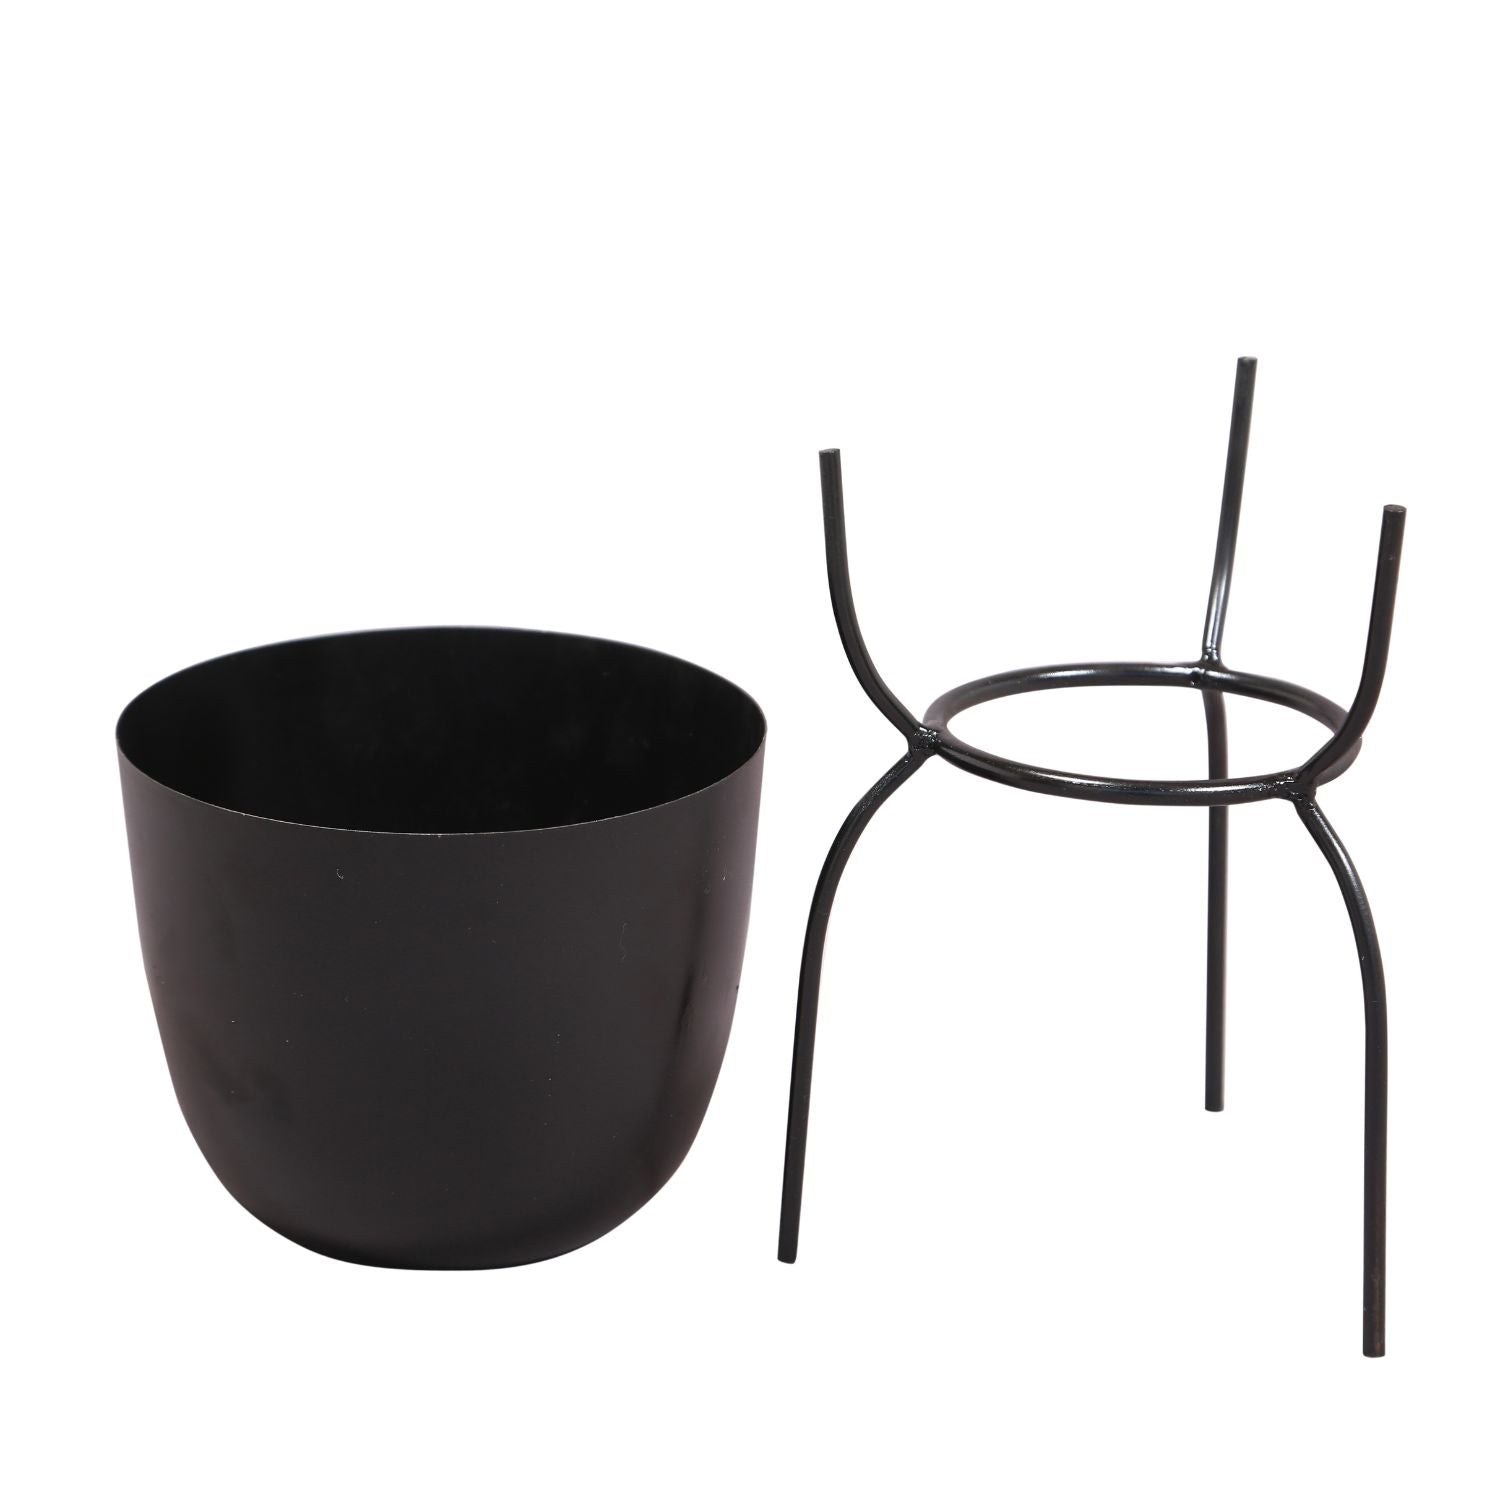 Black Metal Planter with Stand 12 inches tall